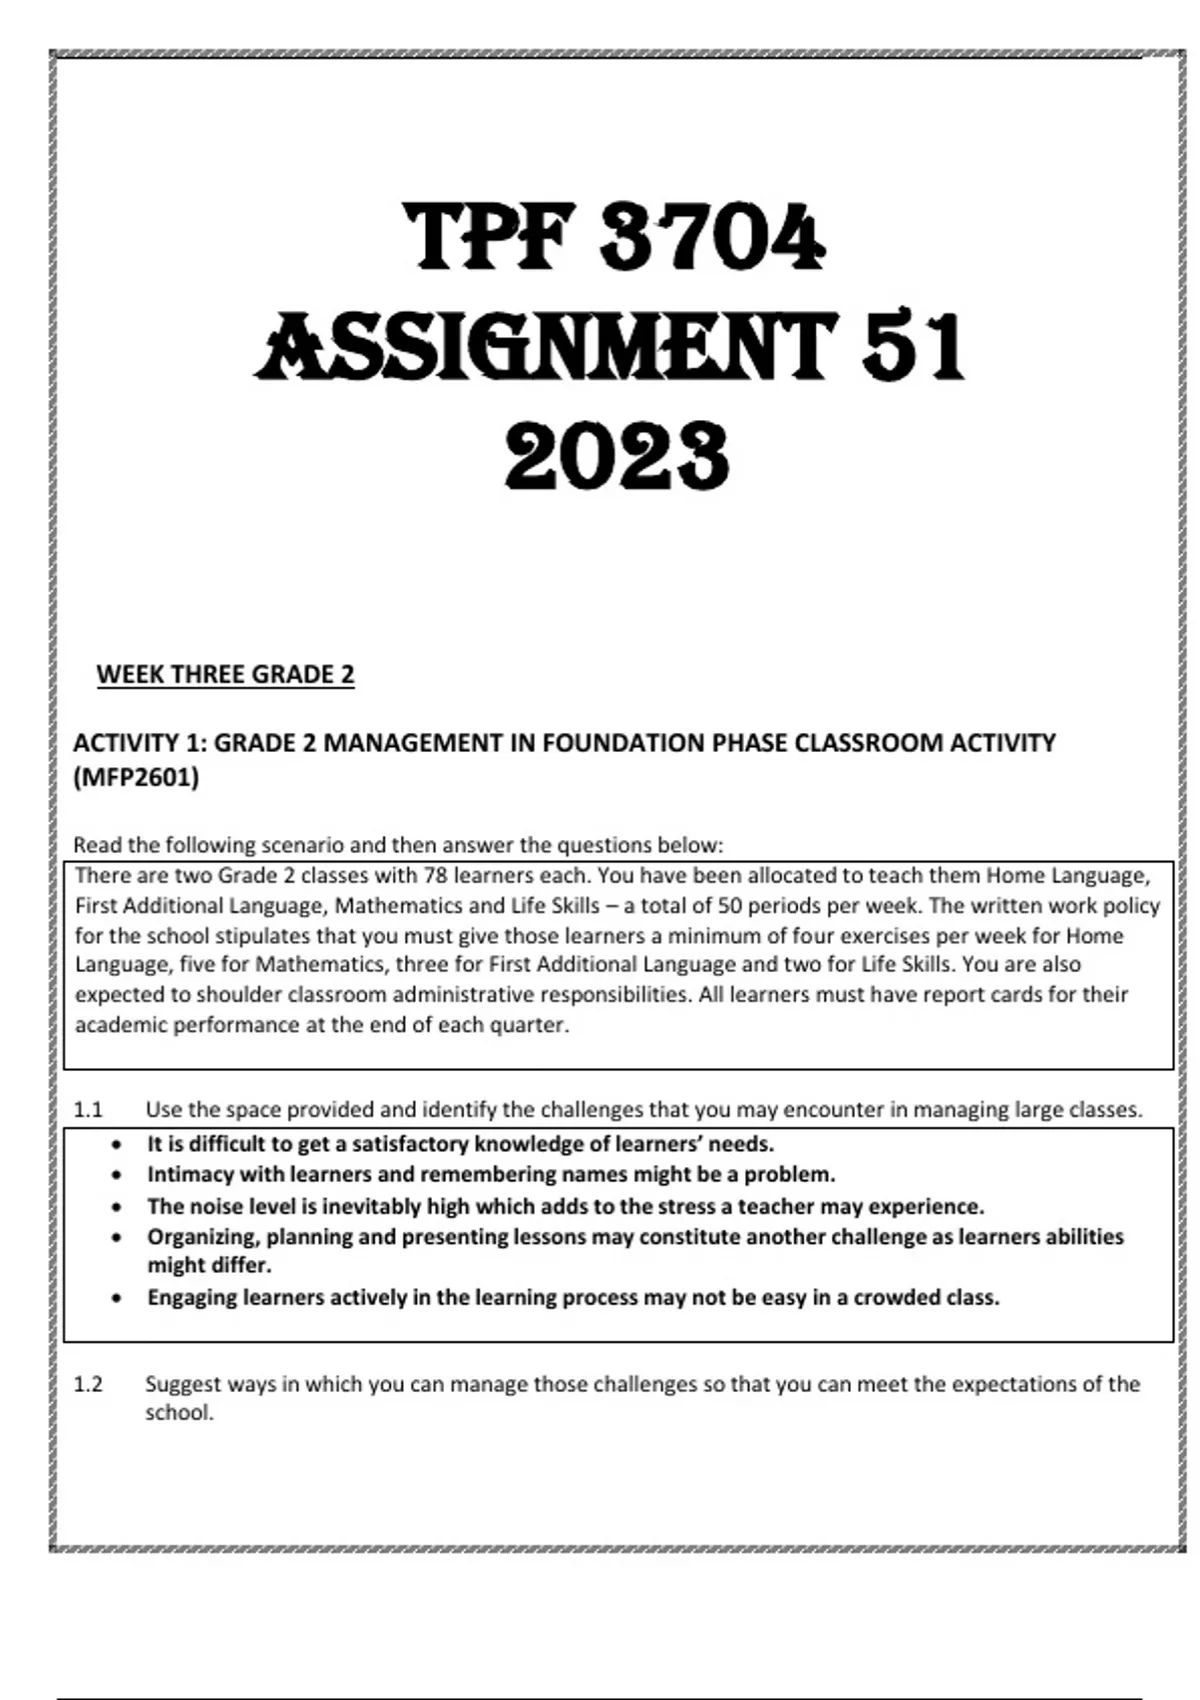 tpf3704 assignment 50 answers 2022